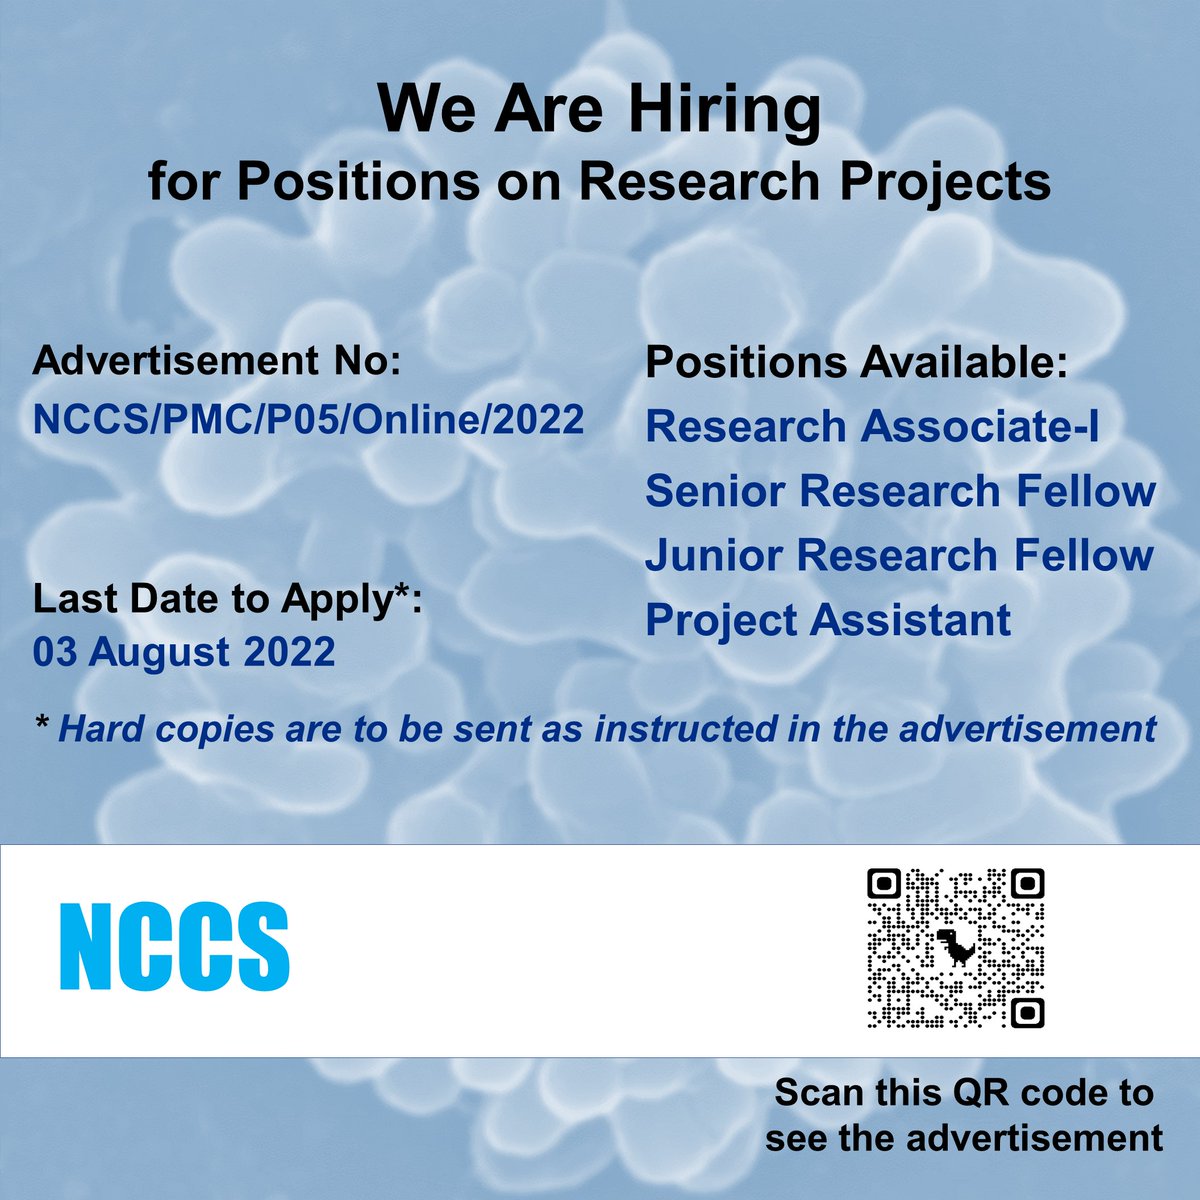 Come, be a part of the #research at NCCS - #Positions #Hiring #CellBiology #Biotechnology @neurodas